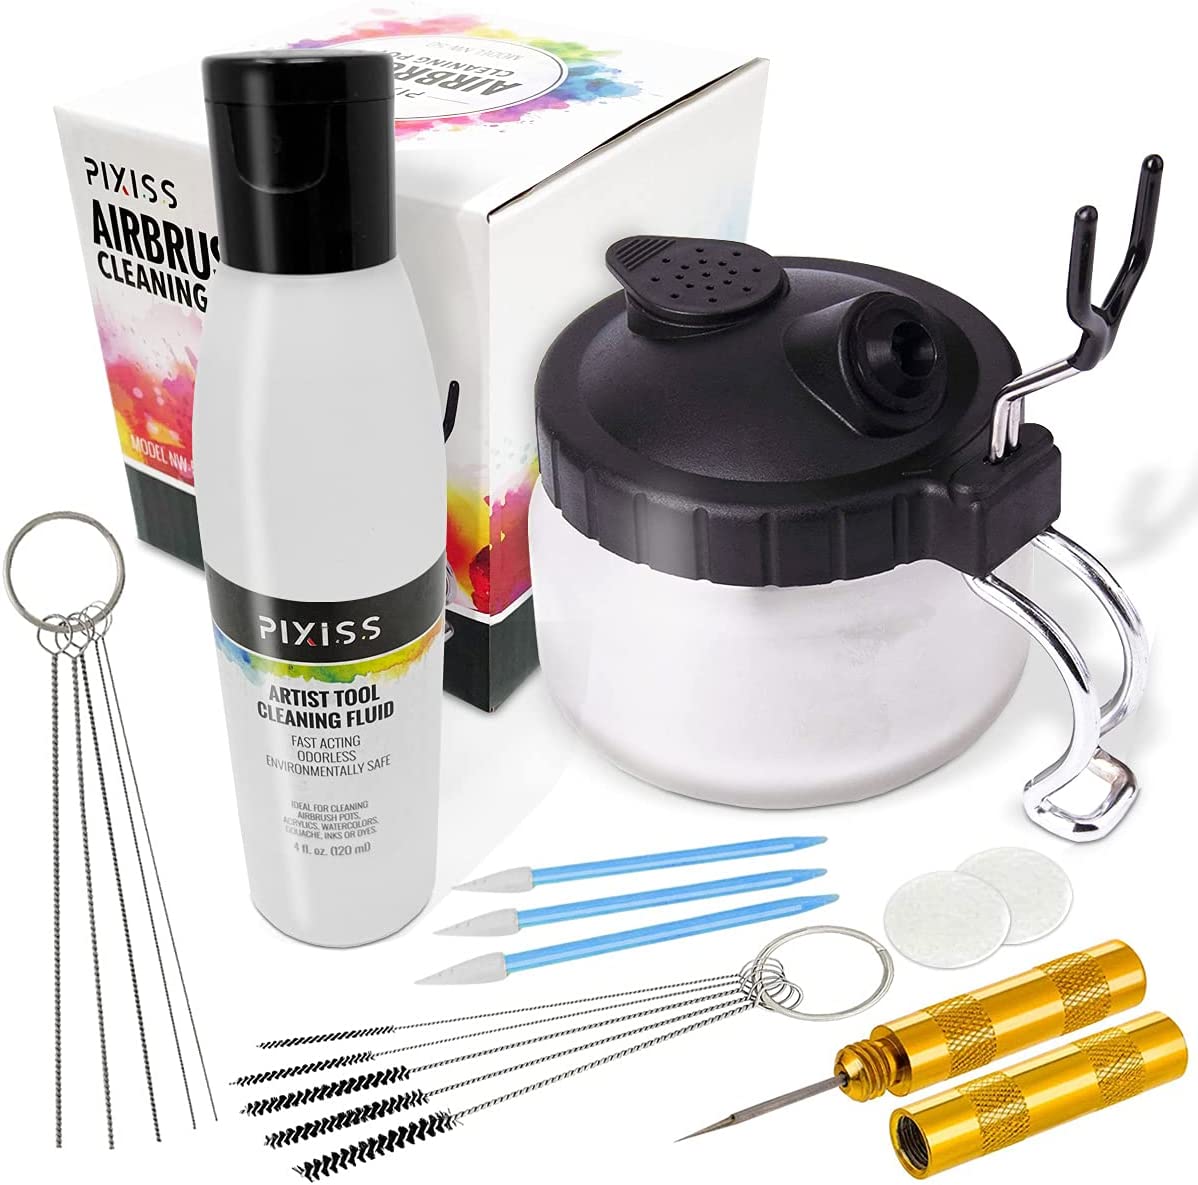 Pixiss Airbrush Cleaning Kit, Brush Cleaner Solution and Airbrush